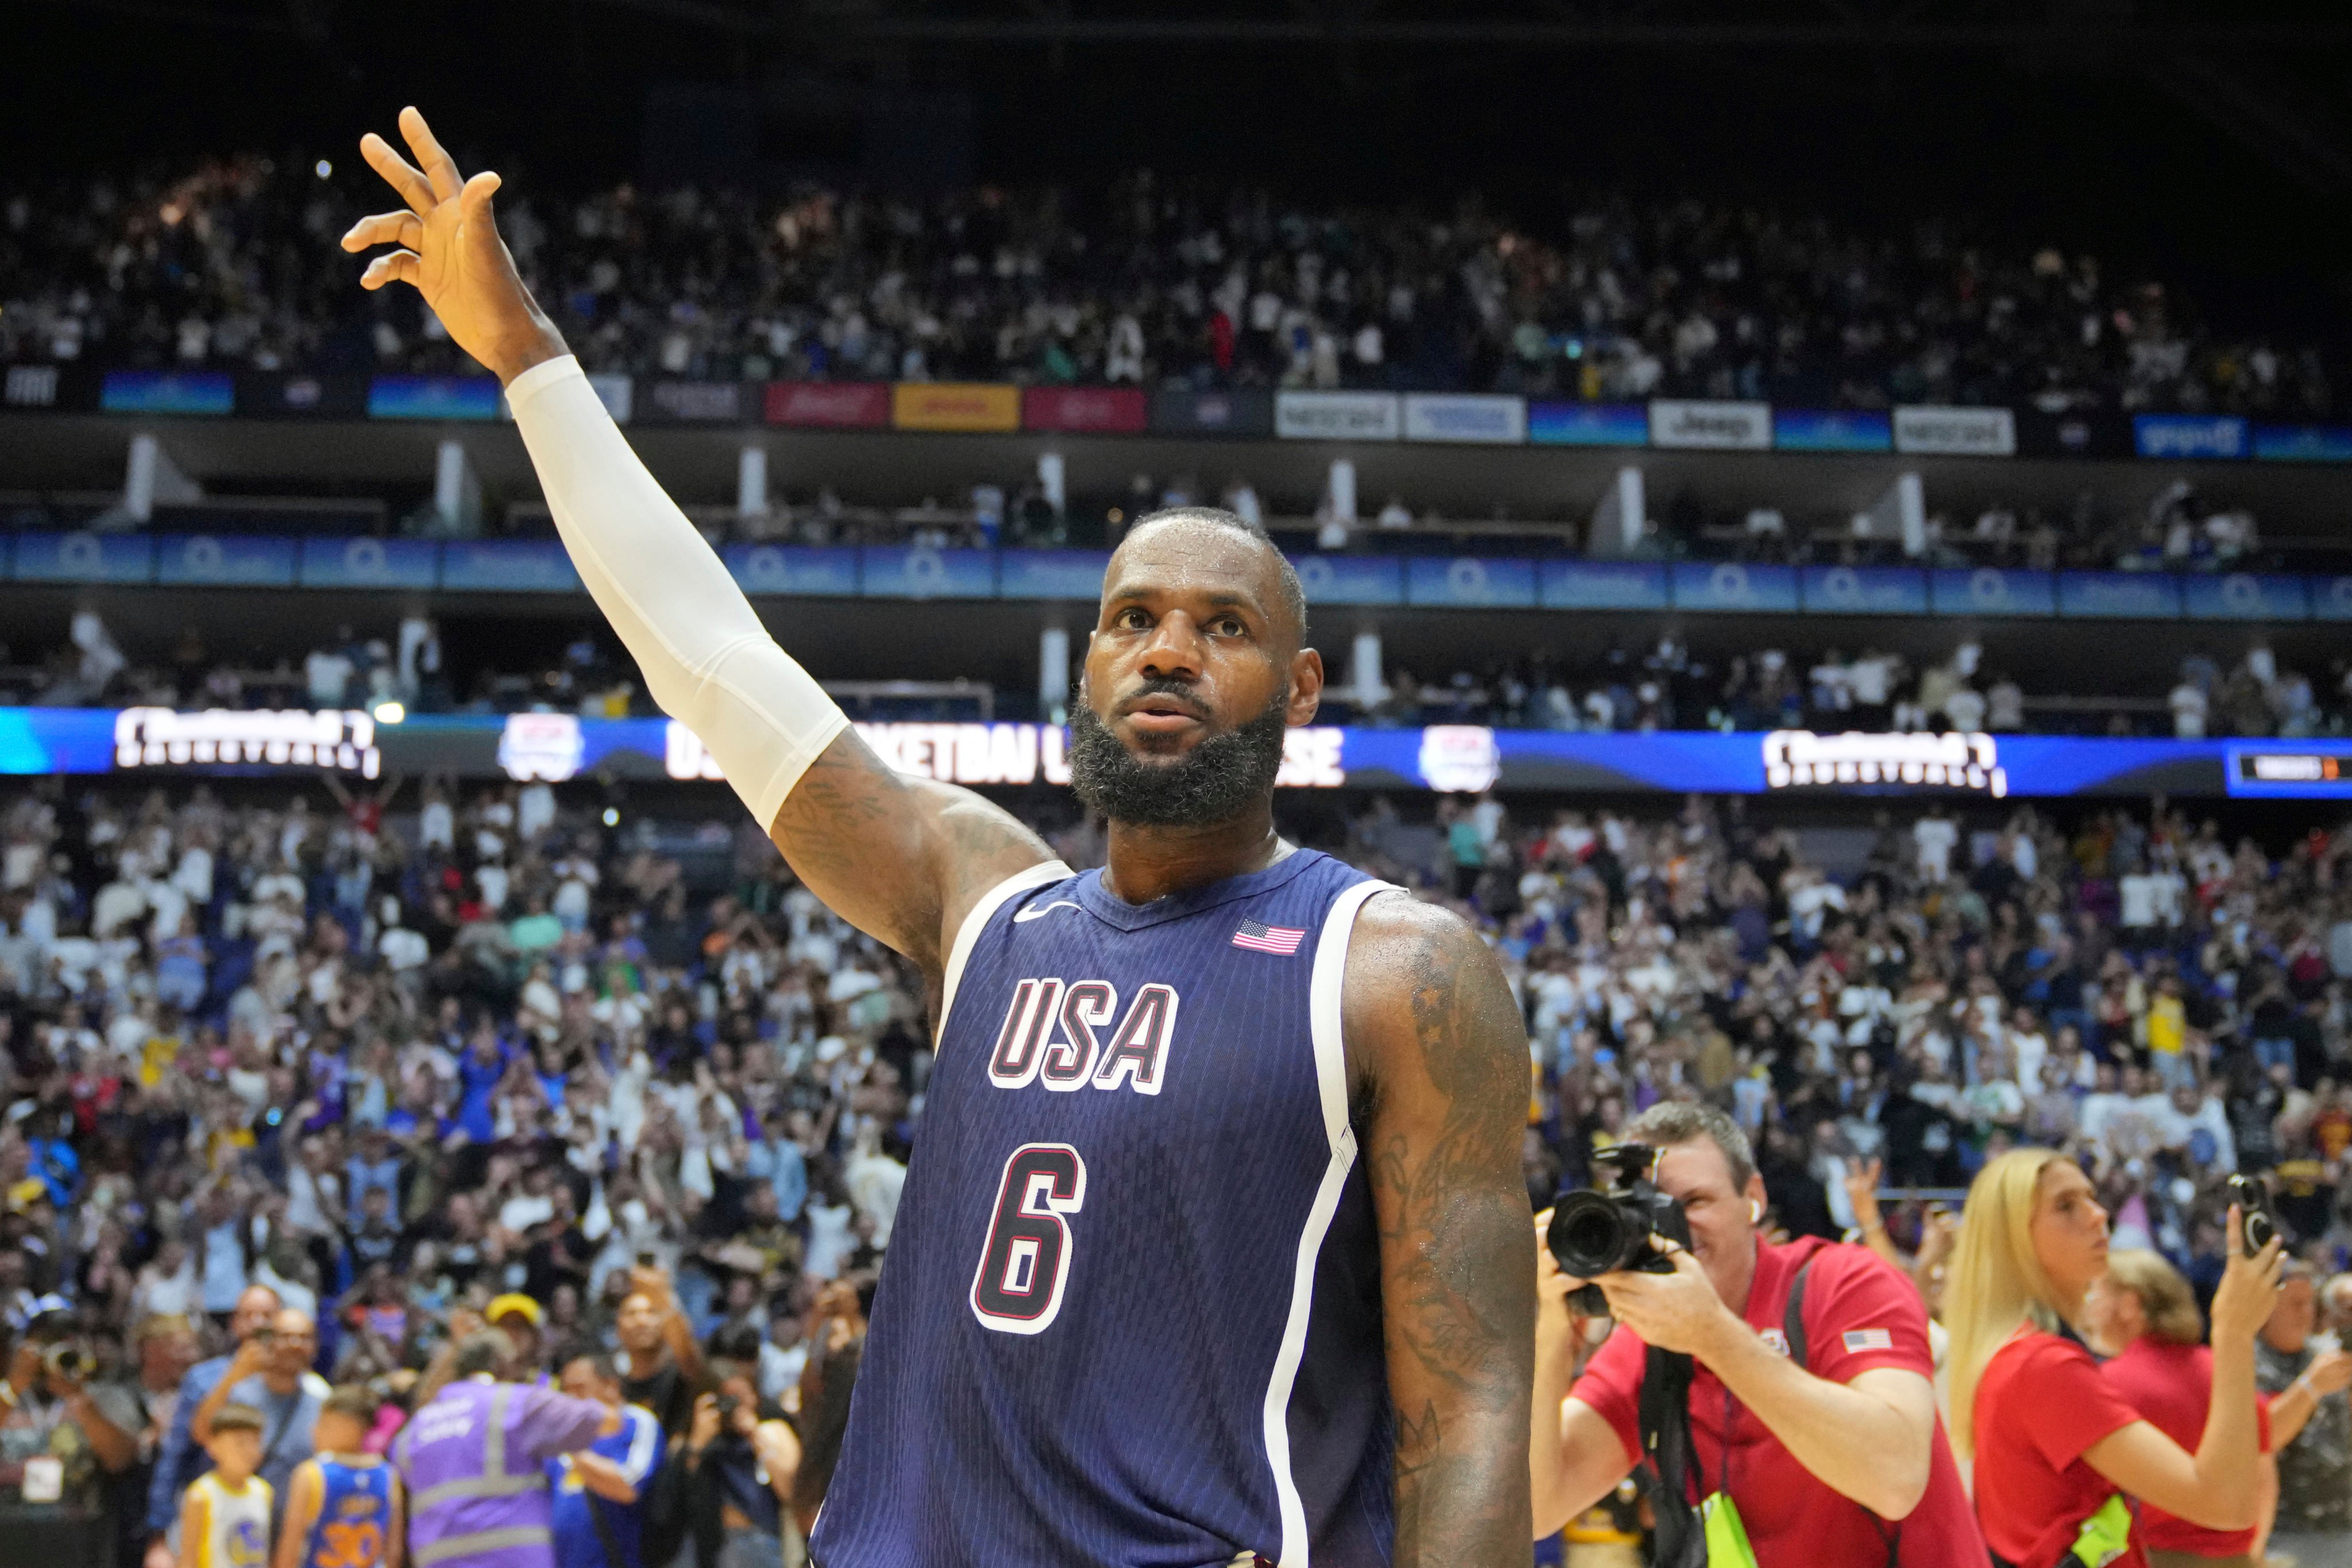 LeBron James waves to the crowd after his points helped the United States prevent a stunnig upset against South Sudan in an Olympic warmup match. Photo: AP